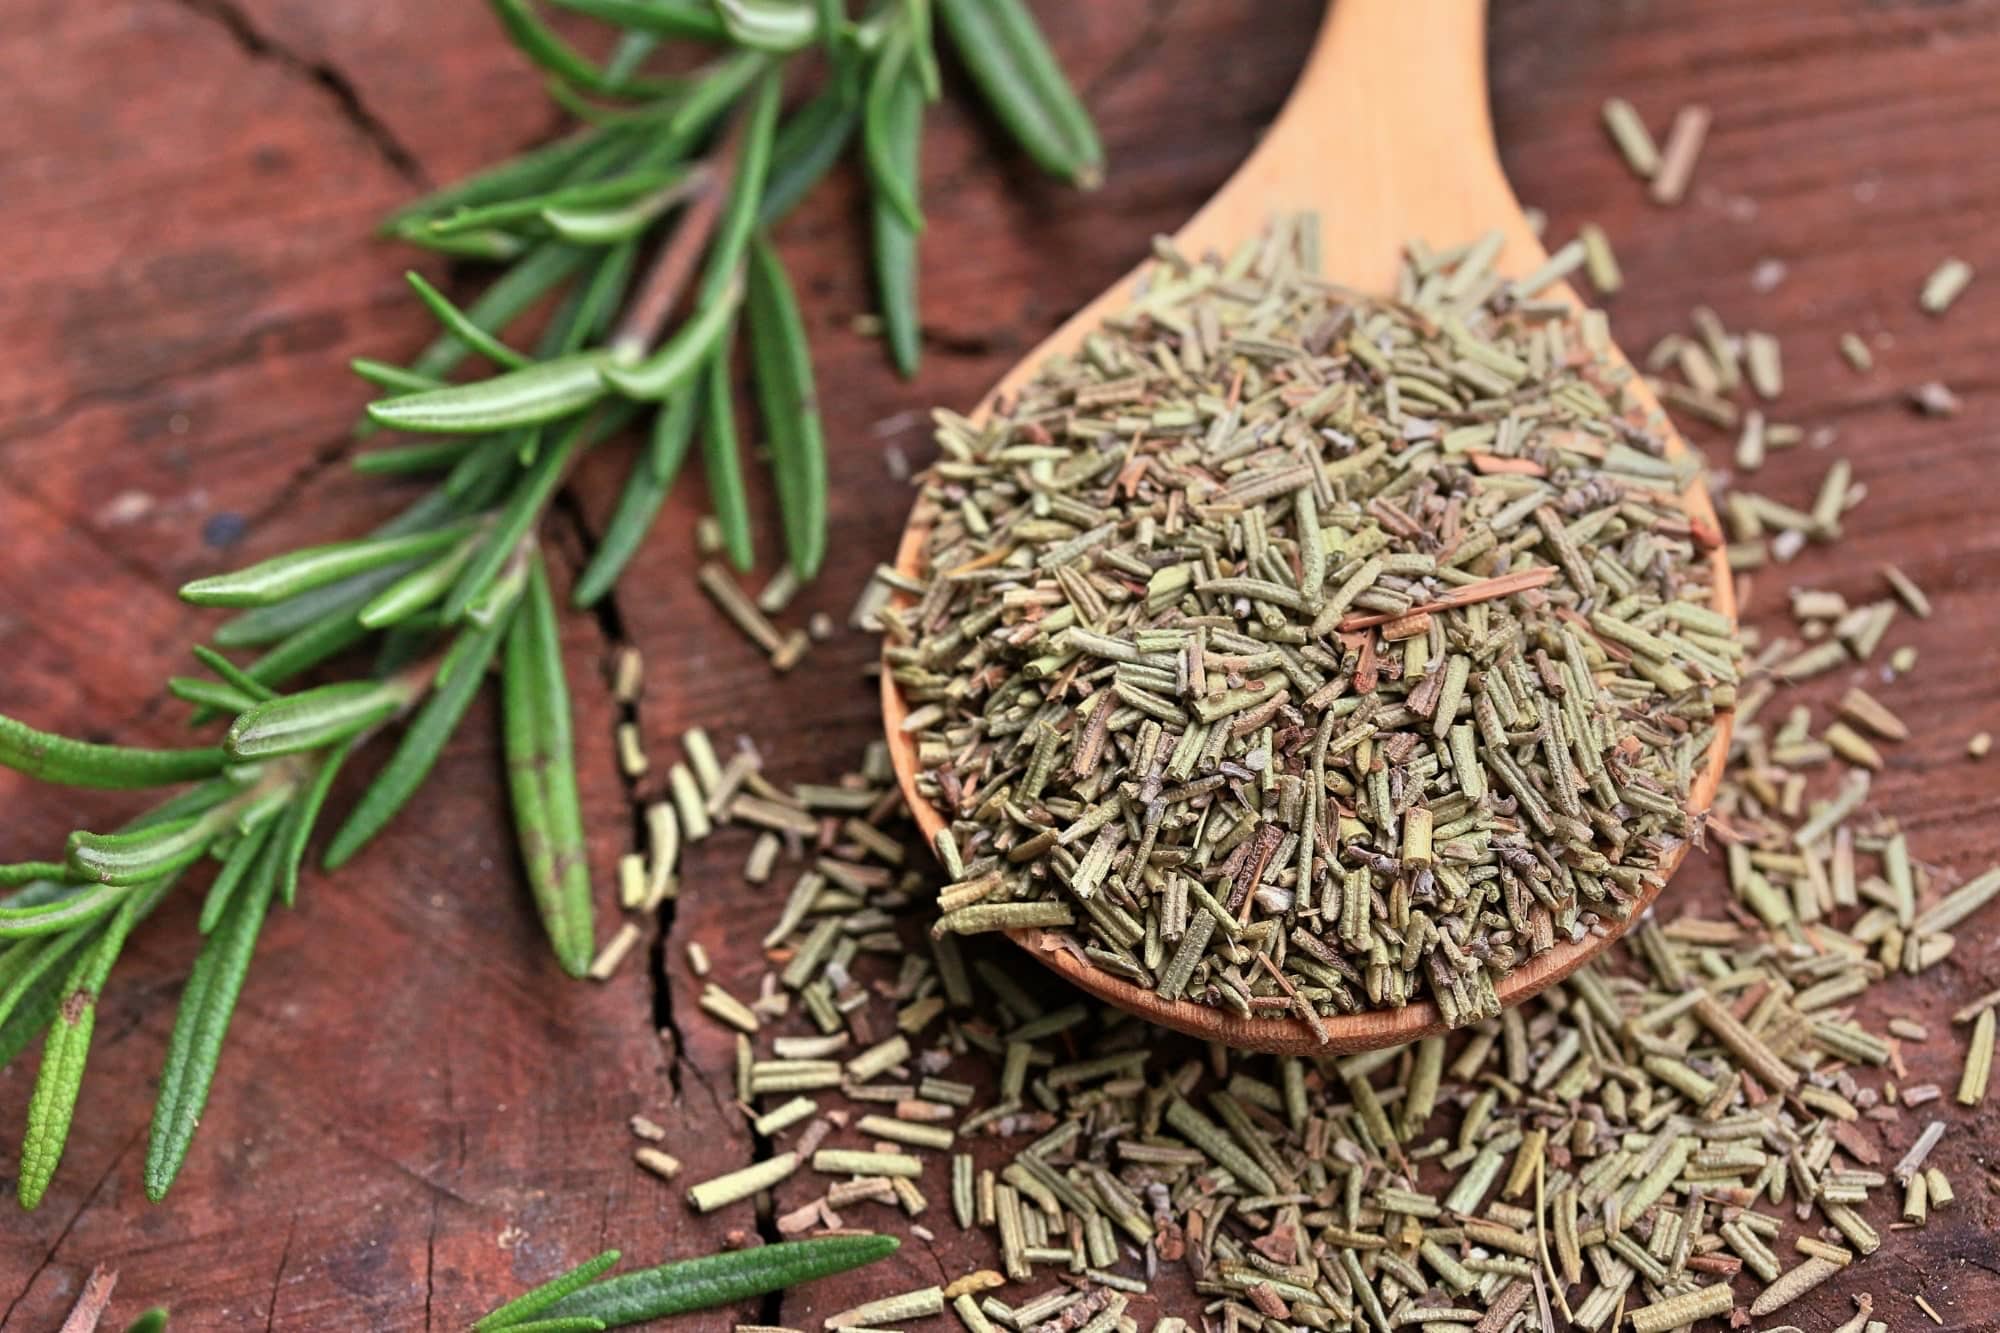 How To Grind Dry Rosemary 